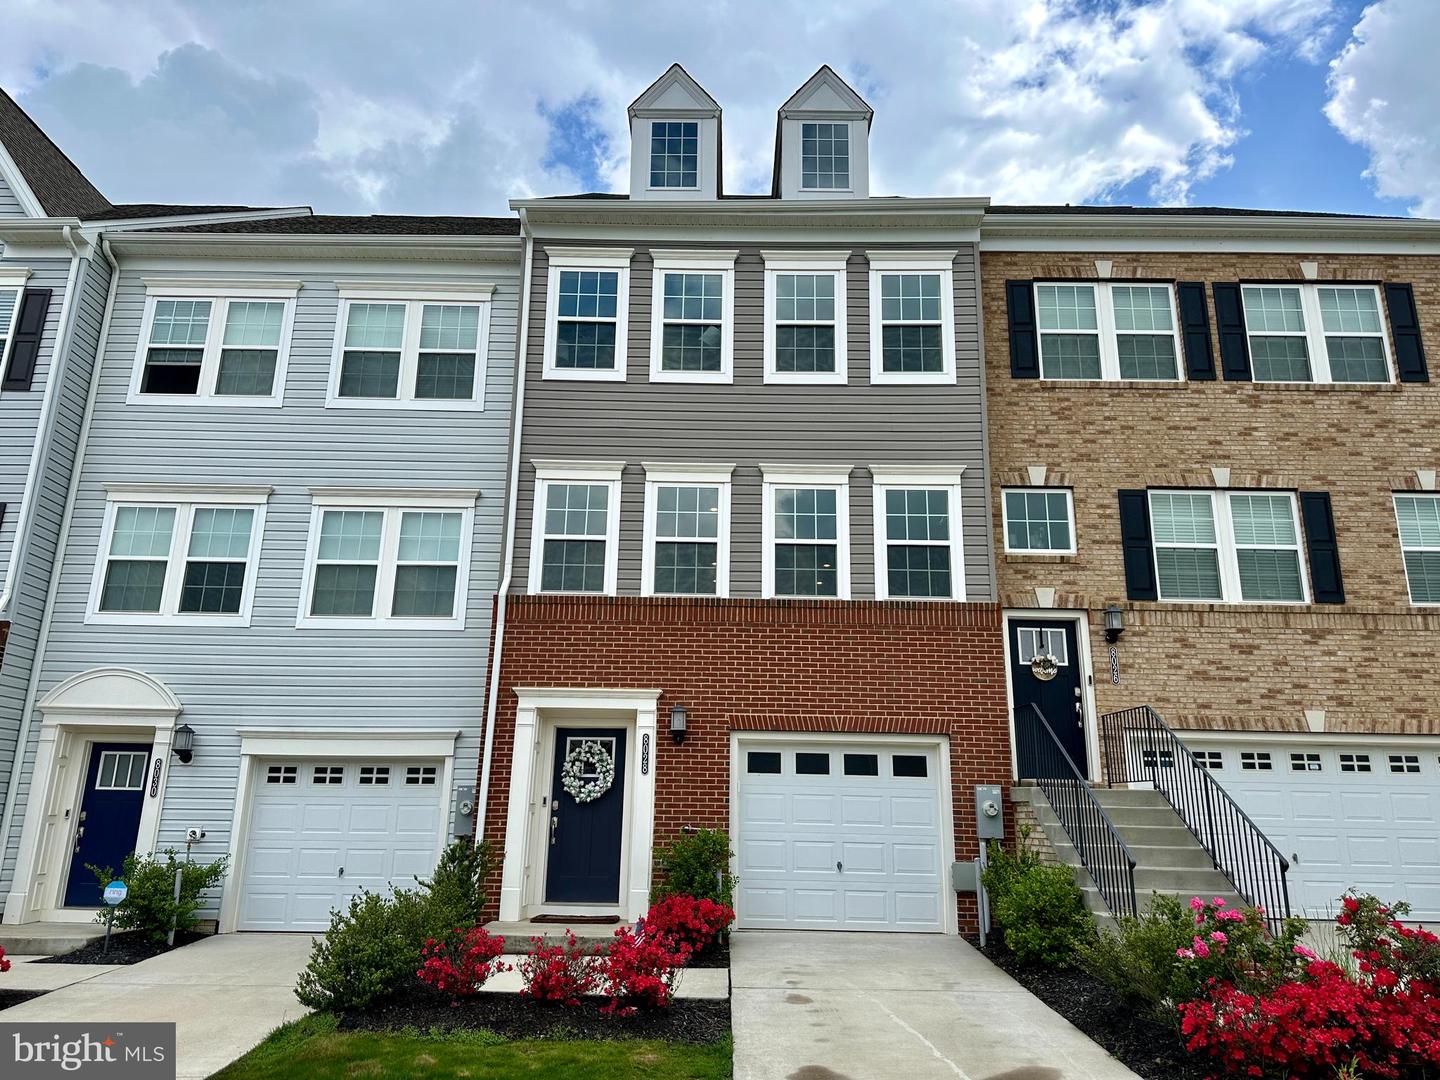 View Ellicott City, MD 21043 townhome